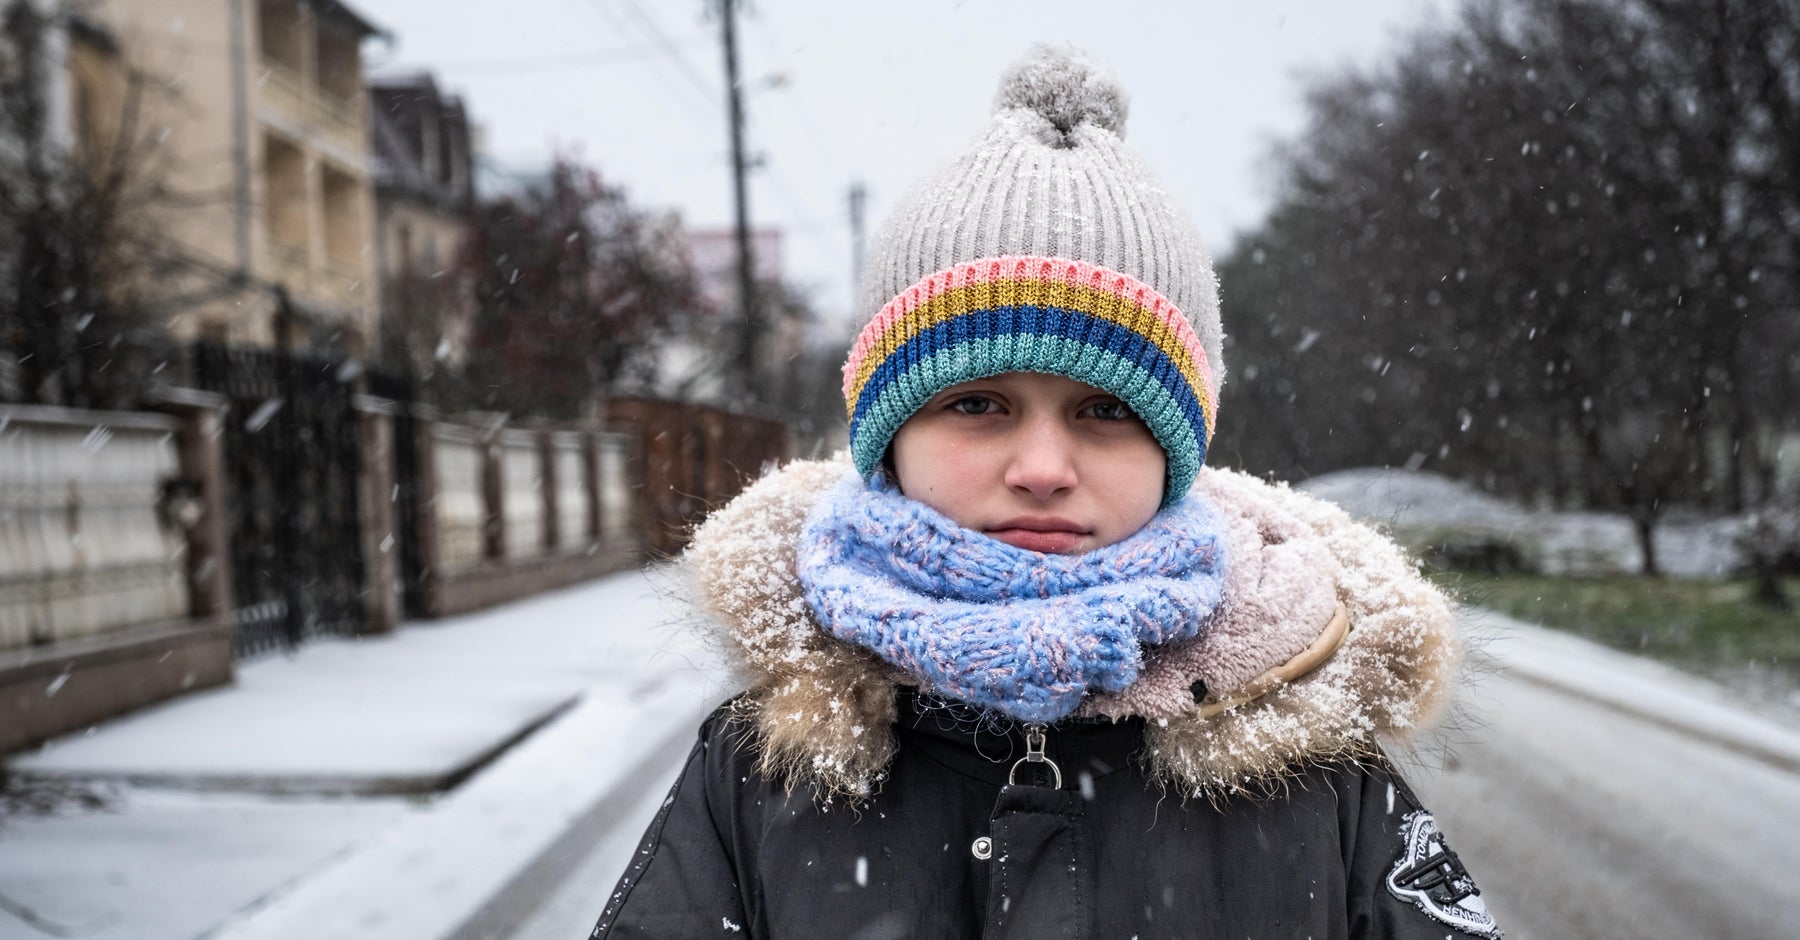 A young girl rugged up and standing on the snowy streets of Ukraine.